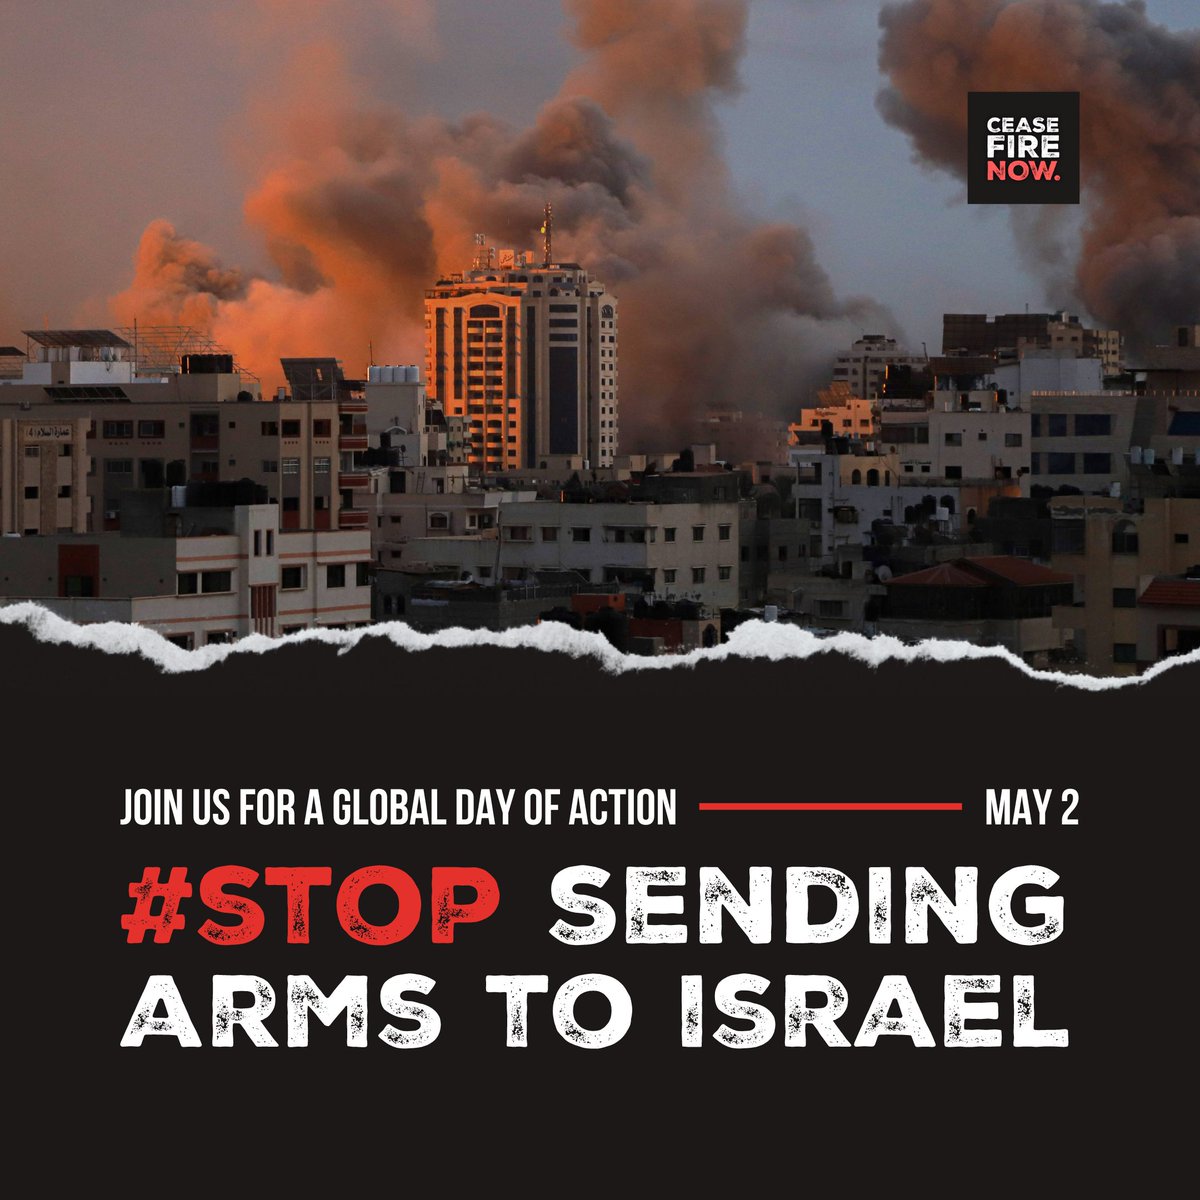 ‼️ TODAY is the Global Day of Action. Arms sales and transfers to Israel MUST STOP and steps towards an immediate, sustained ceasefire must begin. End the human suffering in Gaza now! #CeasefireNOW